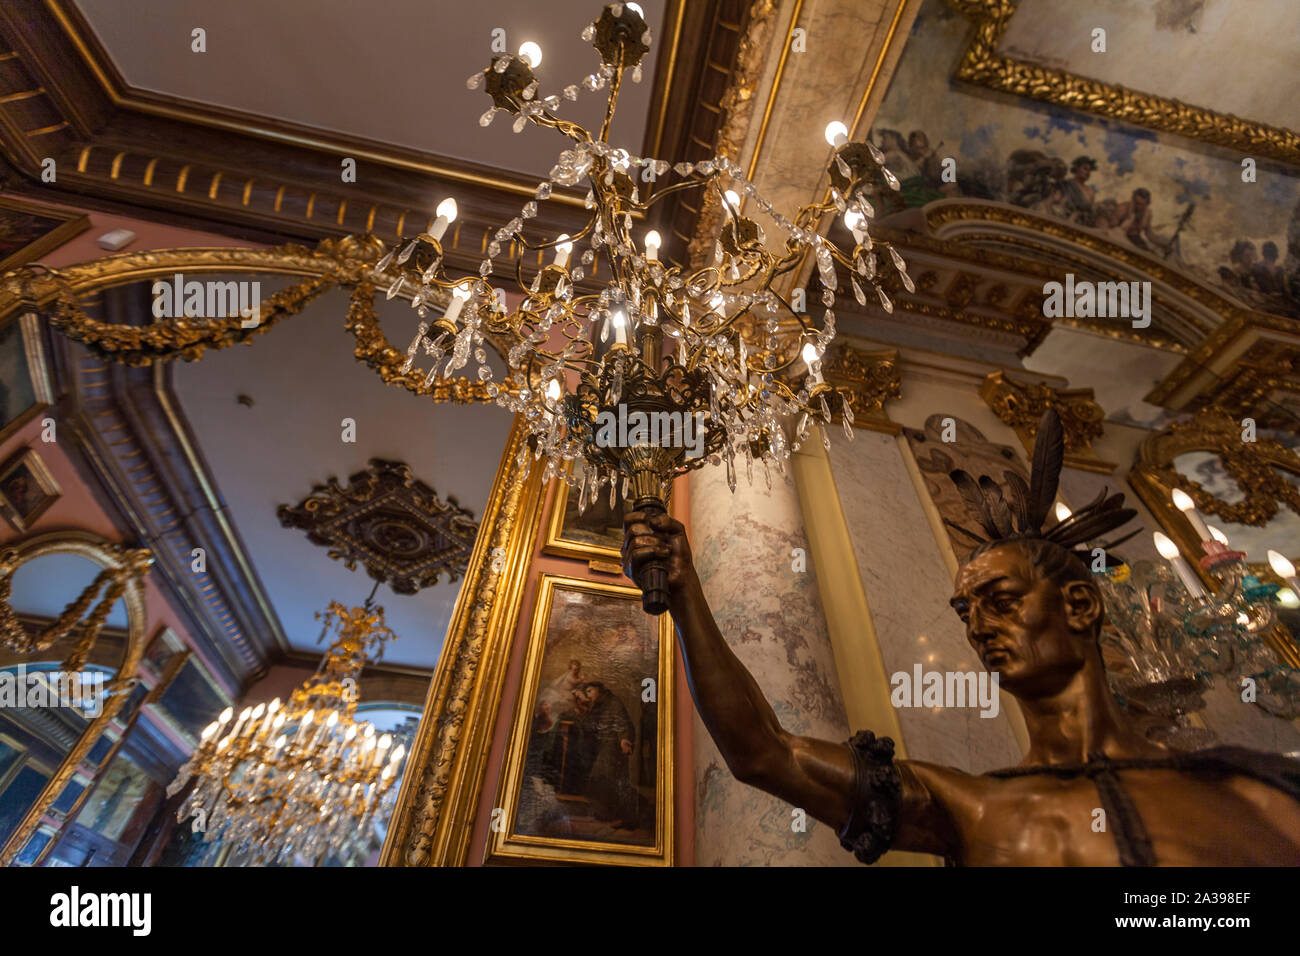 Sculpture of a man hanging a lamp in Museo Cerralbo, Madrid, Spain Stock Photo